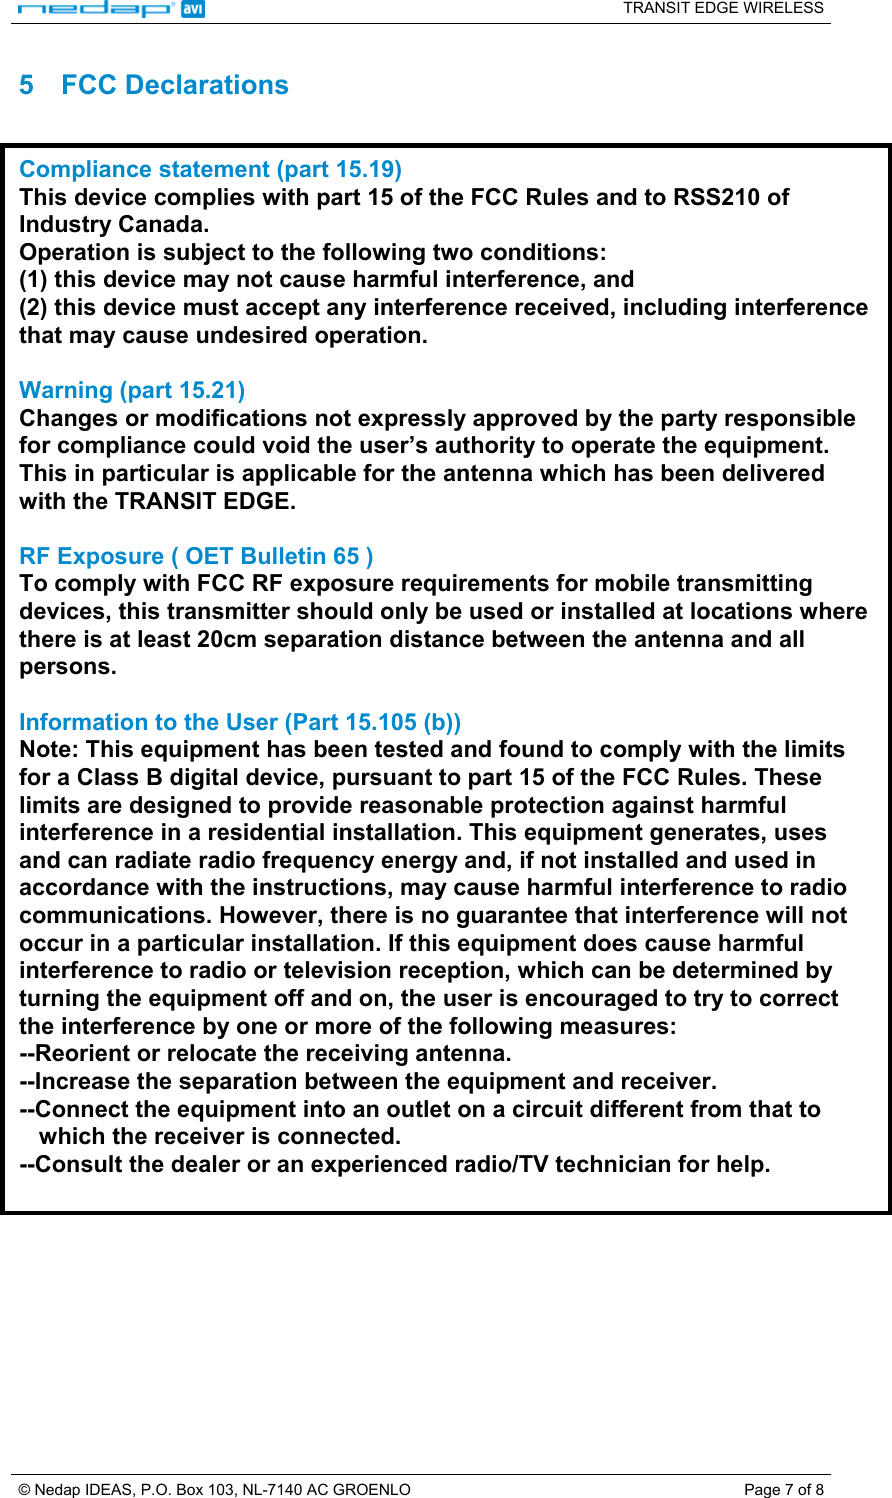   TRANSIT EDGE WIRELESS  © Nedap IDEAS, P.O. Box 103, NL-7140 AC GROENLO  Page 7 of 8 5 FCC Declarations  Compliance statement (part 15.19)  This device complies with part 15 of the FCC Rules and to RSS210 of Industry Canada. Operation is subject to the following two conditions: (1) this device may not cause harmful interference, and (2) this device must accept any interference received, including interference that may cause undesired operation.  Warning (part 15.21) Changes or modifications not expressly approved by the party responsible for compliance could void the user’s authority to operate the equipment. This in particular is applicable for the antenna which has been delivered with the TRANSIT EDGE.  RF Exposure ( OET Bulletin 65 ) To comply with FCC RF exposure requirements for mobile transmitting devices, this transmitter should only be used or installed at locations where there is at least 20cm separation distance between the antenna and all persons.  Information to the User (Part 15.105 (b)) Note: This equipment has been tested and found to comply with the limits for a Class B digital device, pursuant to part 15 of the FCC Rules. These limits are designed to provide reasonable protection against harmful interference in a residential installation. This equipment generates, uses and can radiate radio frequency energy and, if not installed and used in accordance with the instructions, may cause harmful interference to radio communications. However, there is no guarantee that interference will not occur in a particular installation. If this equipment does cause harmful interference to radio or television reception, which can be determined by turning the equipment off and on, the user is encouraged to try to correct the interference by one or more of the following measures: --Reorient or relocate the receiving antenna. --Increase the separation between the equipment and receiver. --Connect the equipment into an outlet on a circuit different from that to     which the receiver is connected. --Consult the dealer or an experienced radio/TV technician for help.  